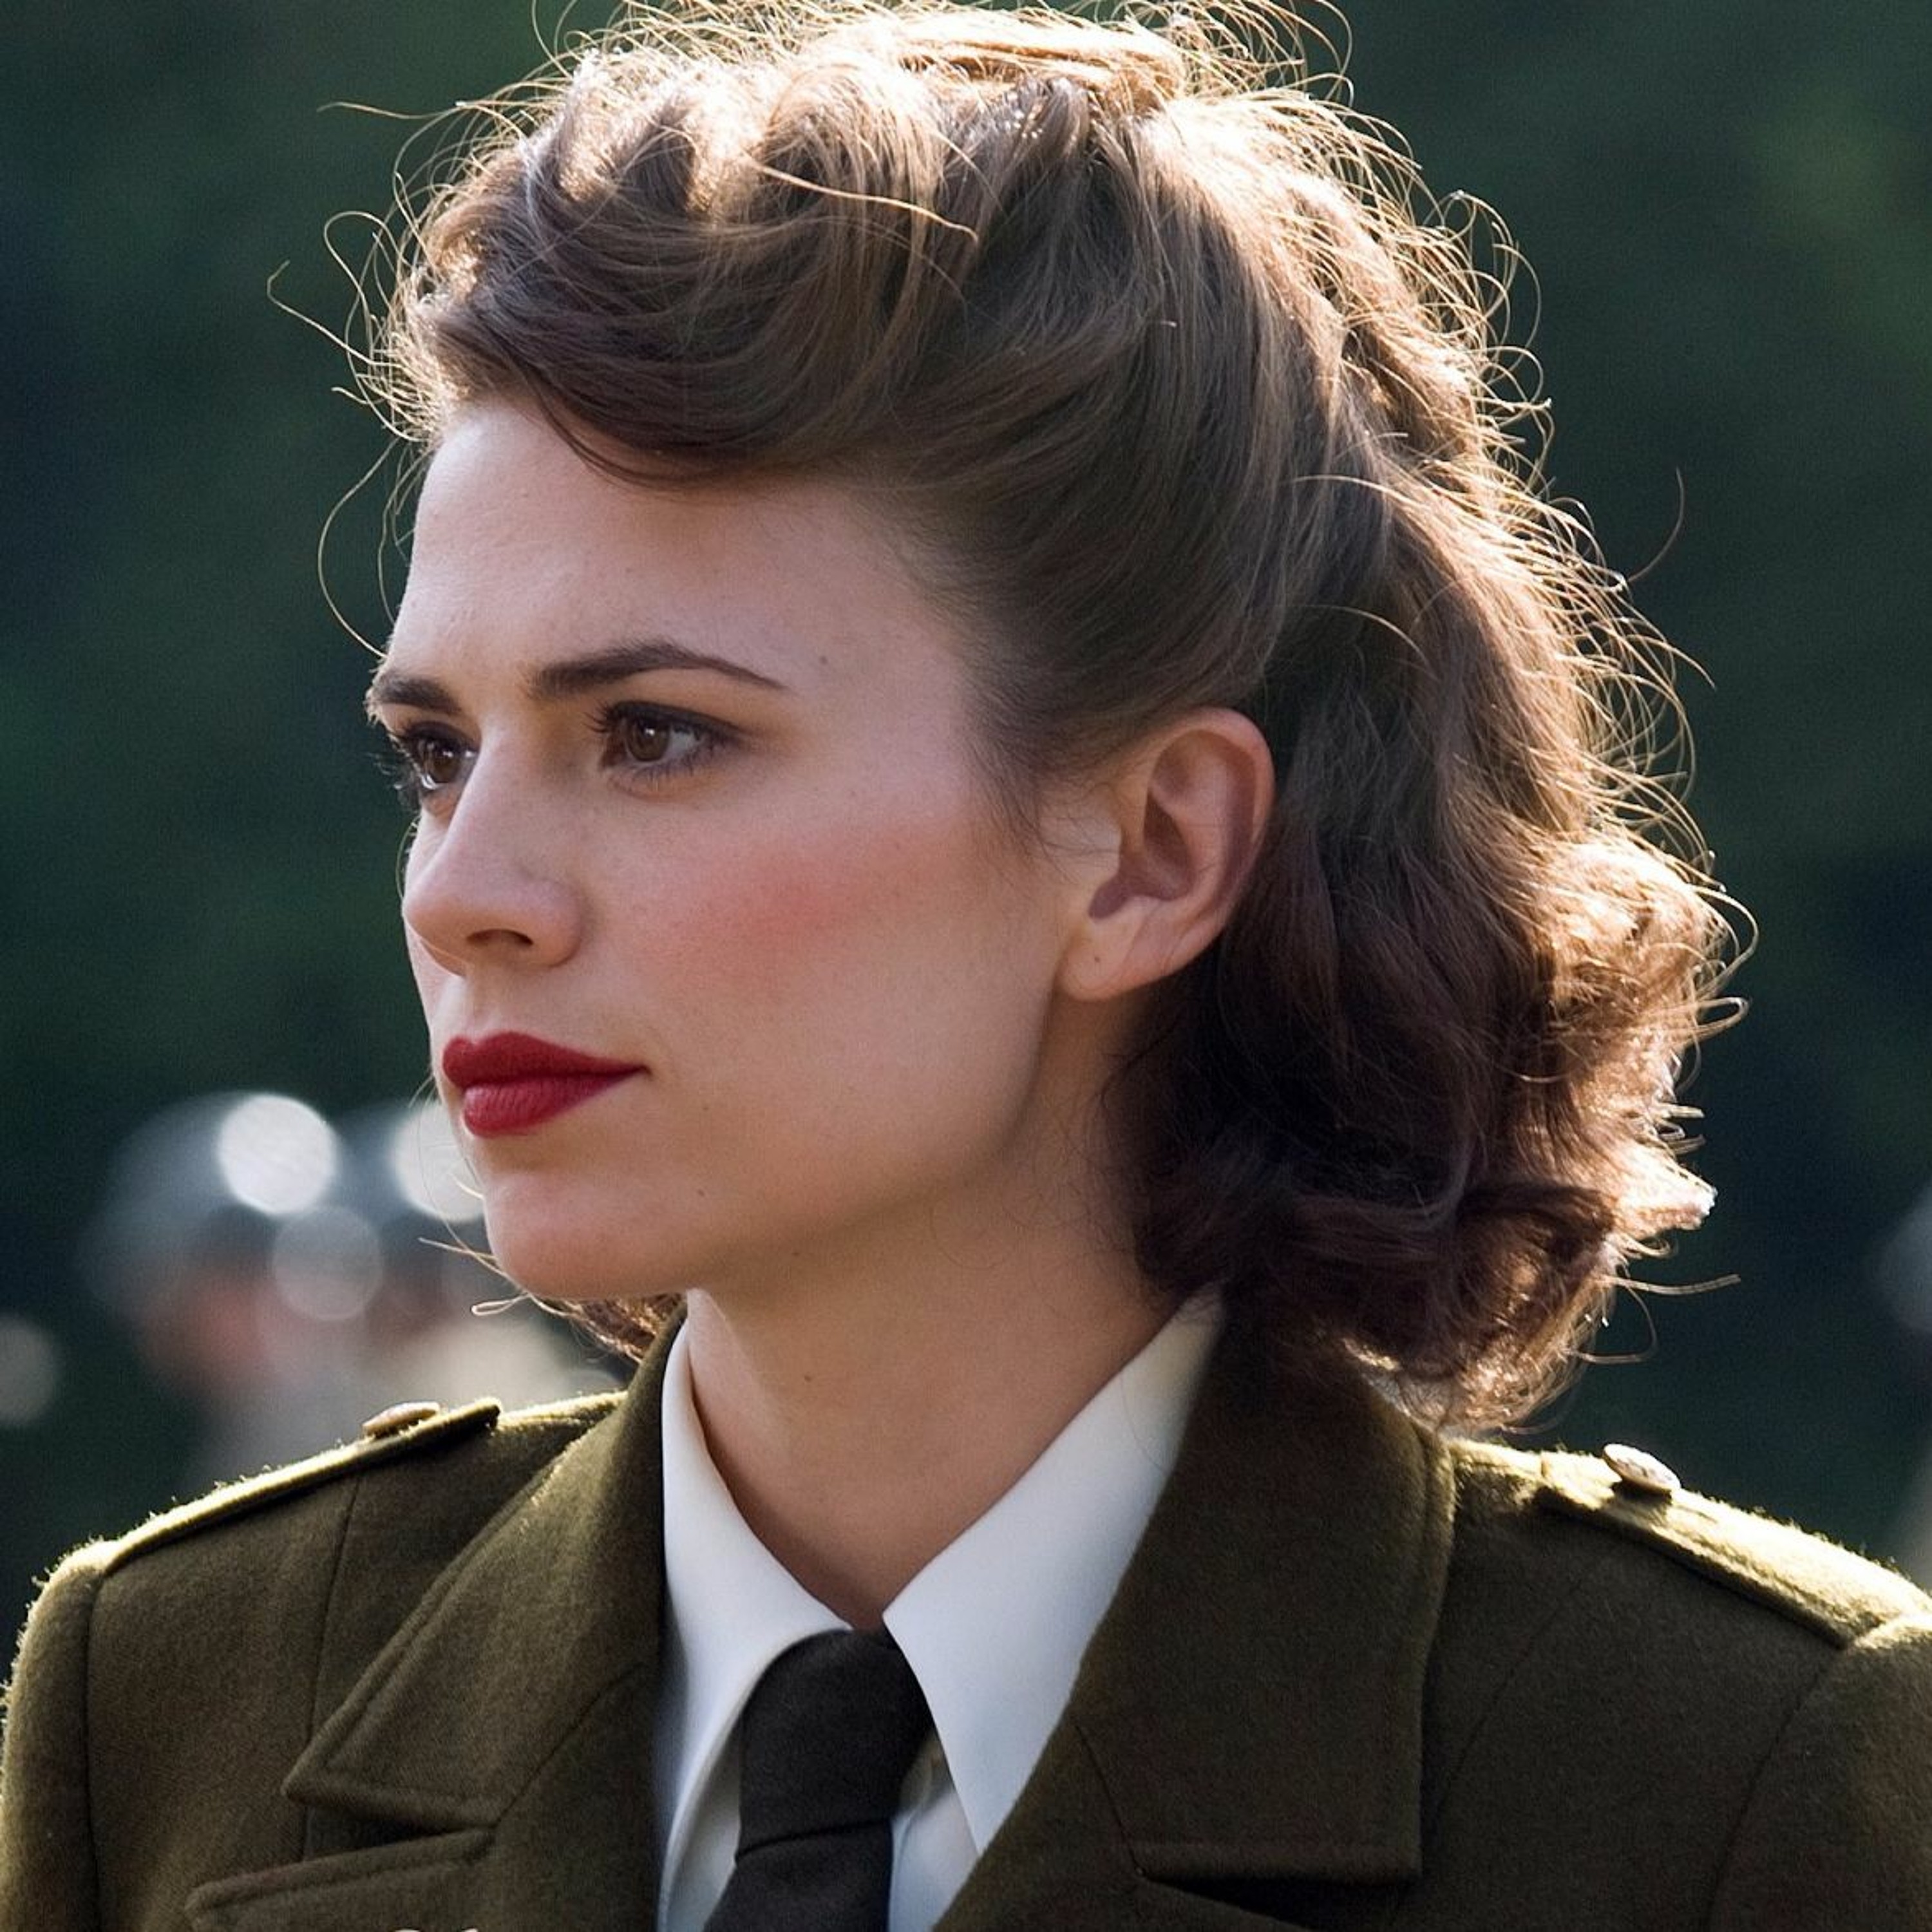 Agent Carter Hair Tutorial ~ Two Looks in One! - YouTube